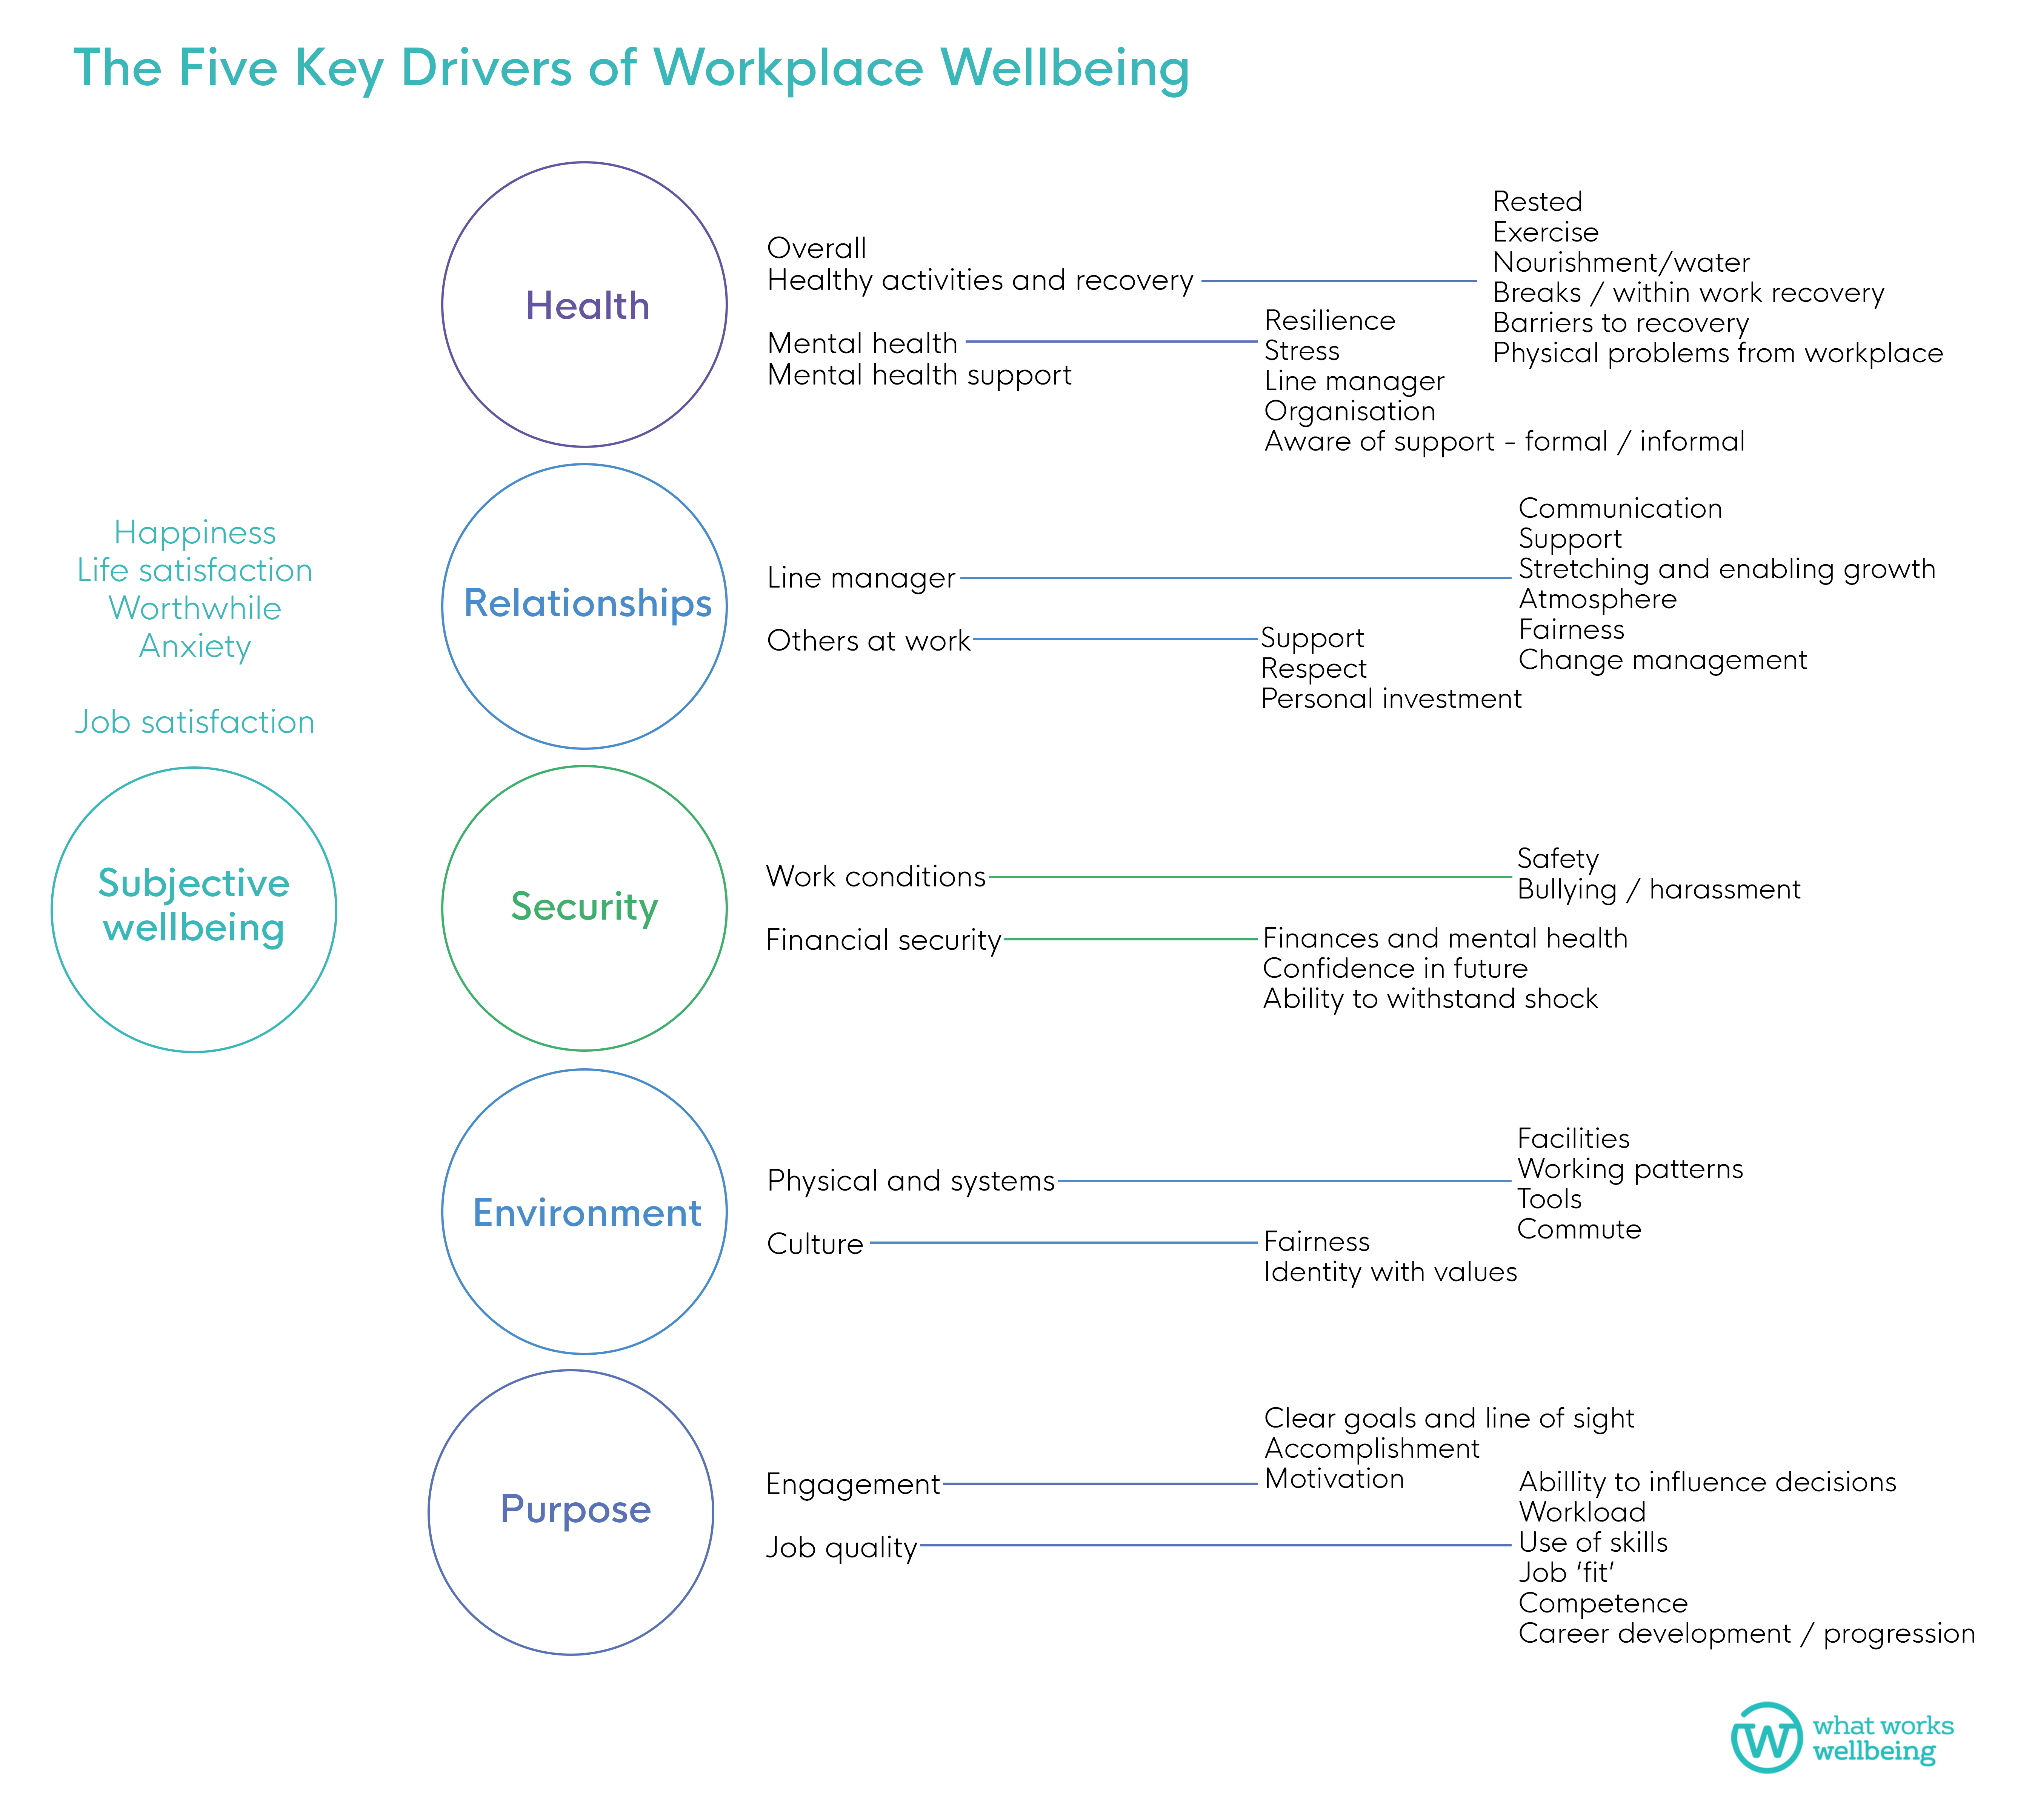 Five key drivers of workplace wellbeing